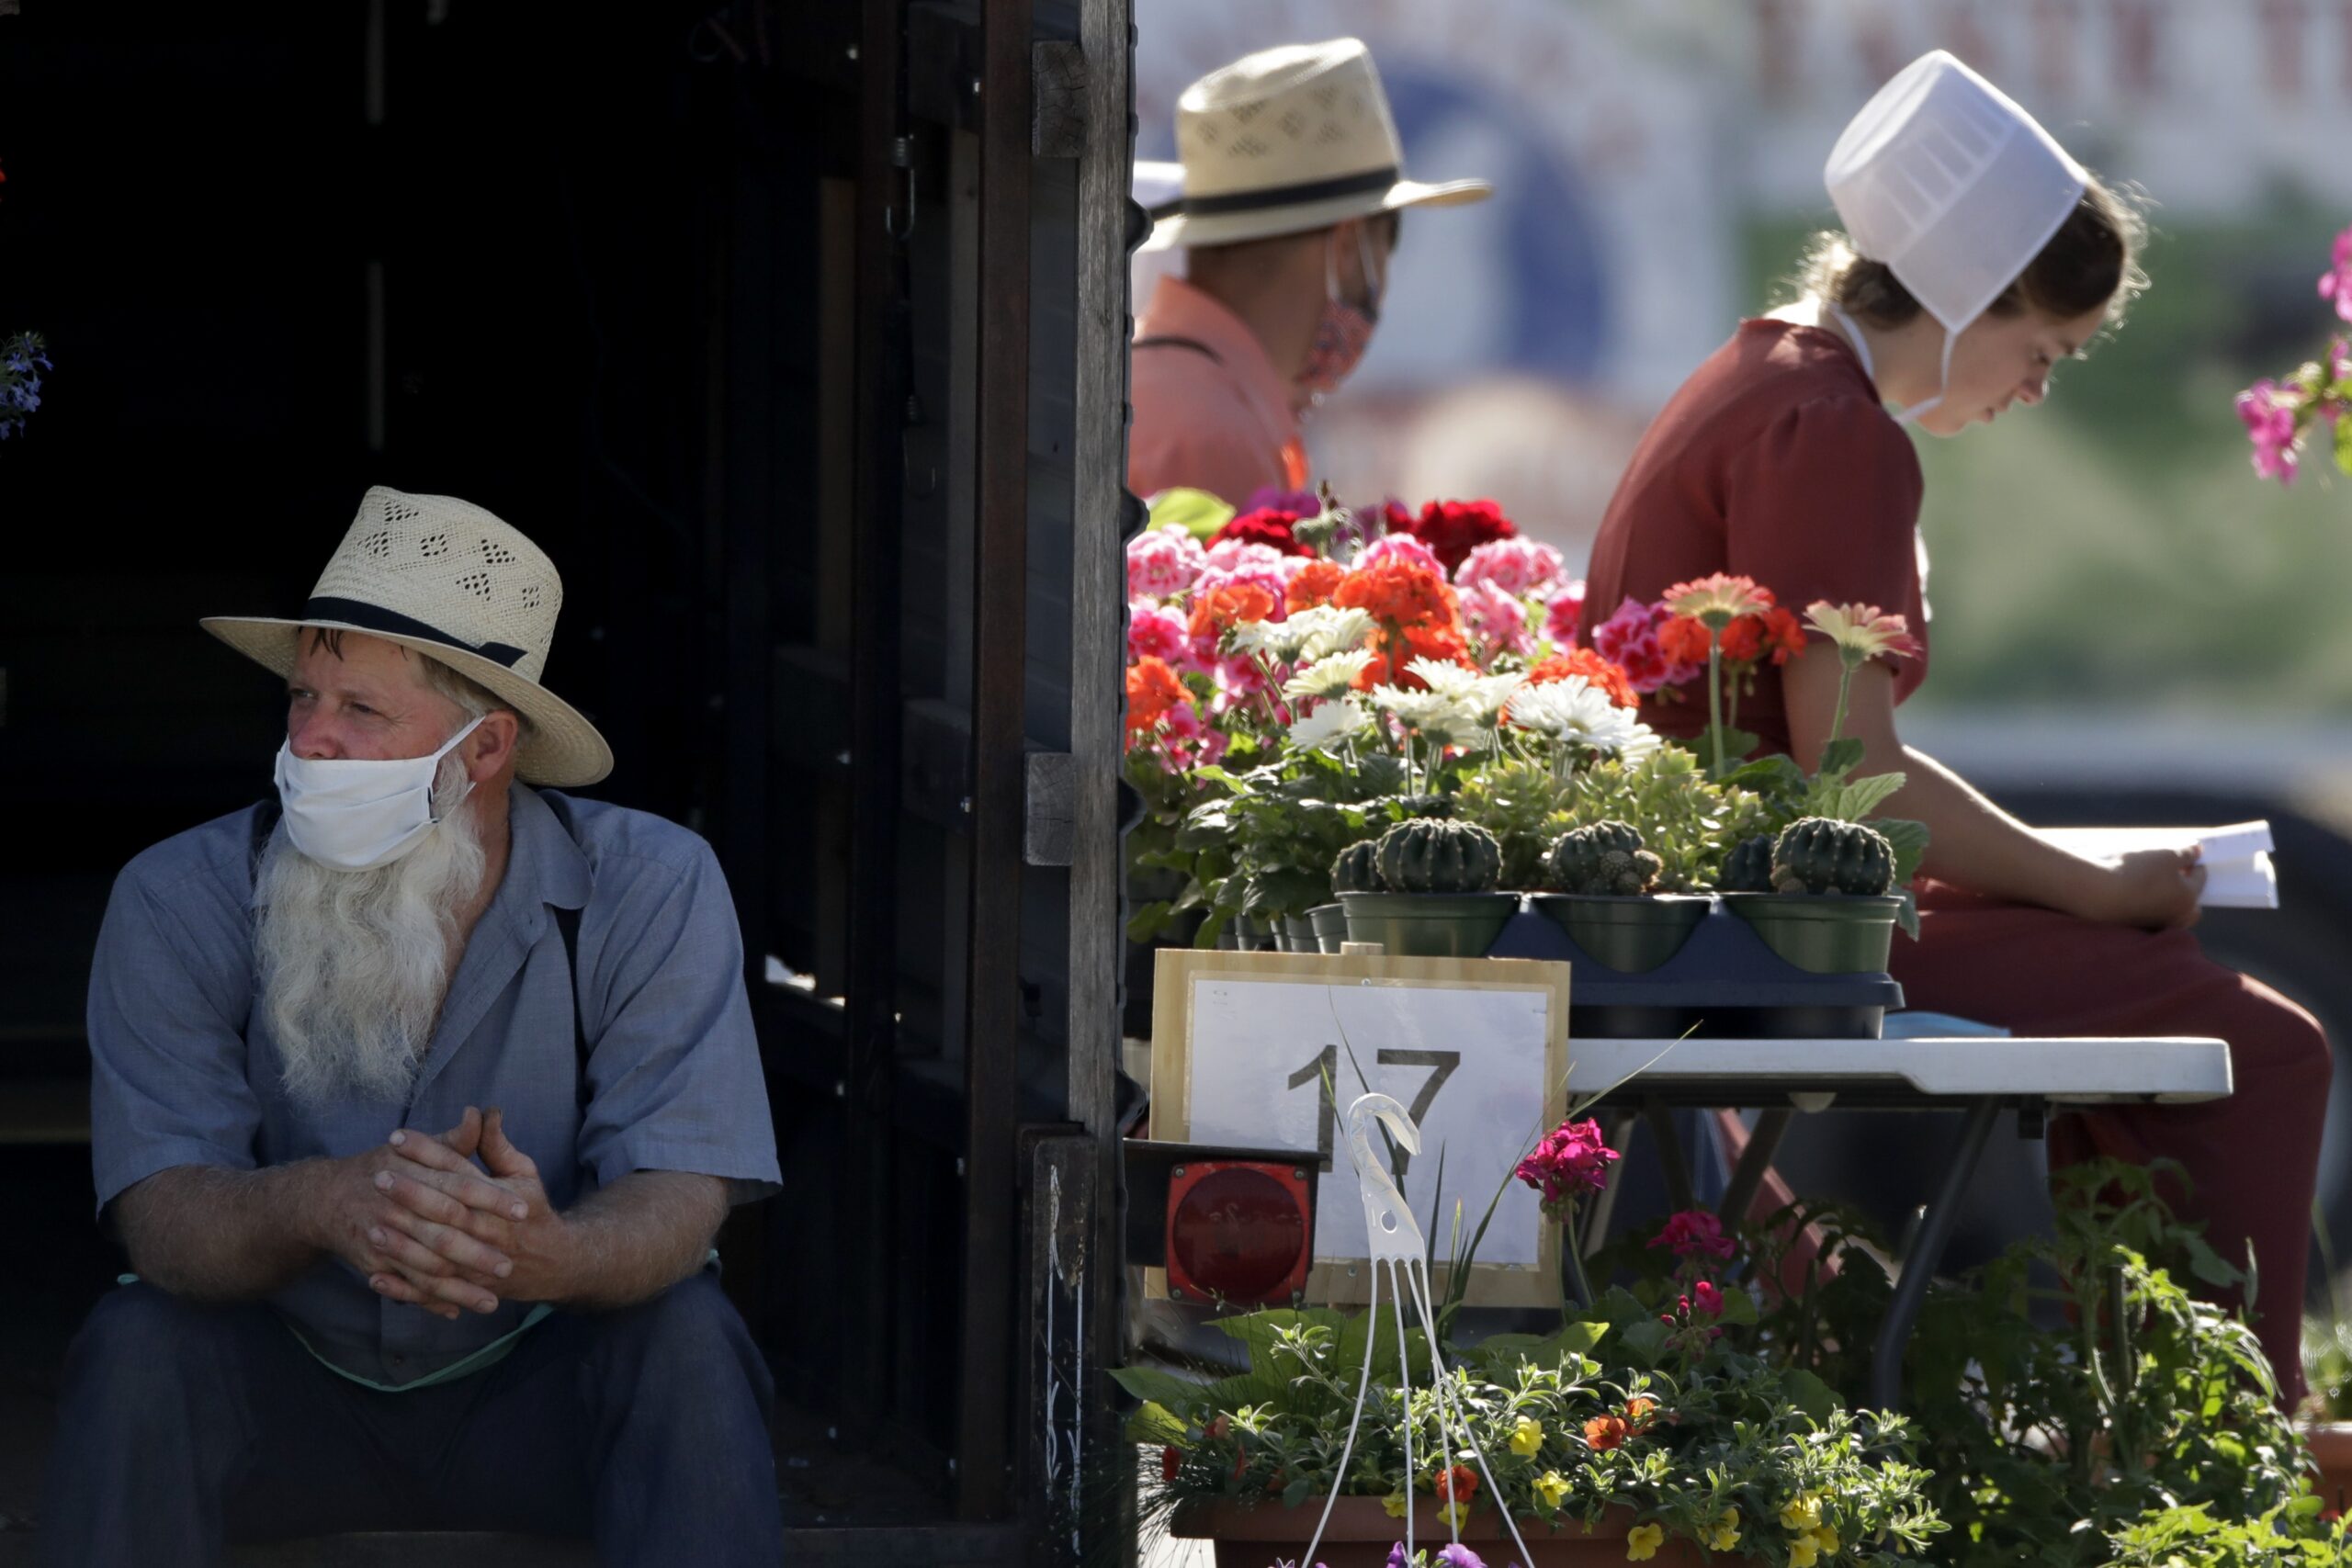 Vendors wait for customers at a drive-thru farmers market